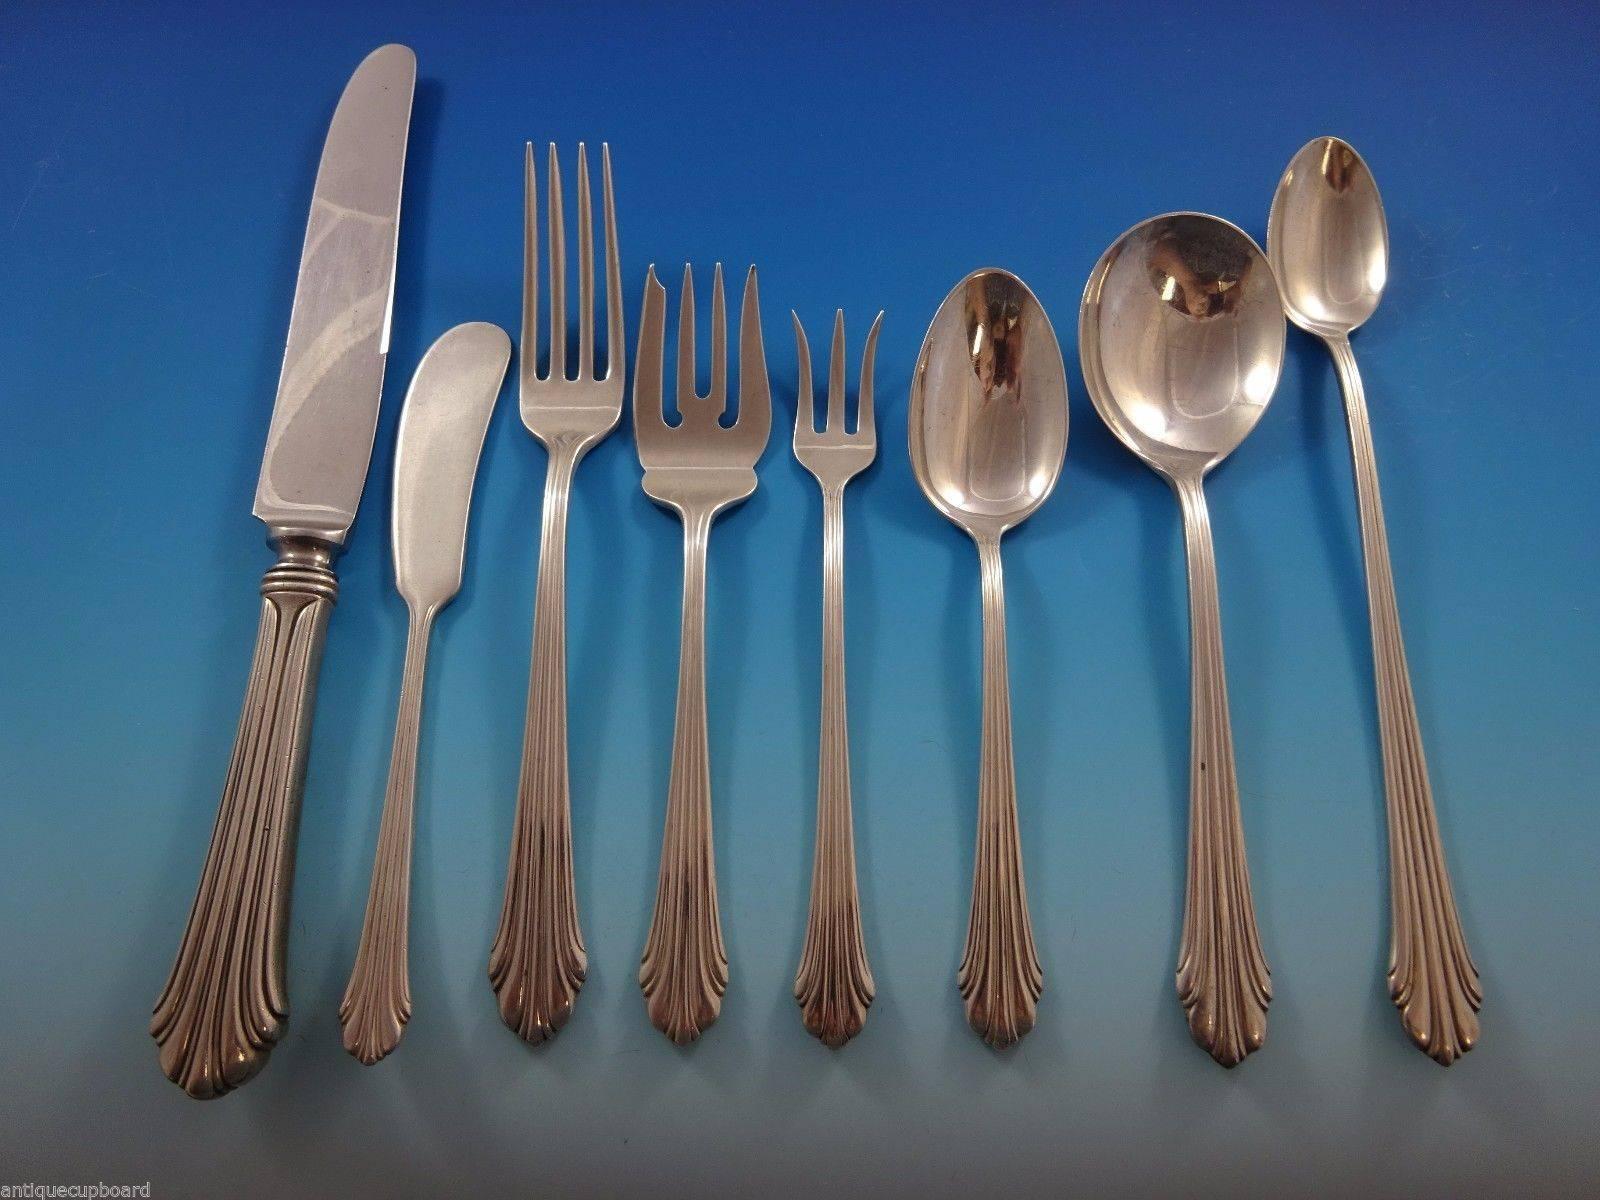 Lovely Homewood by Kirk Stieff sterling silver flatware set - 99 pieces. This set includes:

12 knives, 9